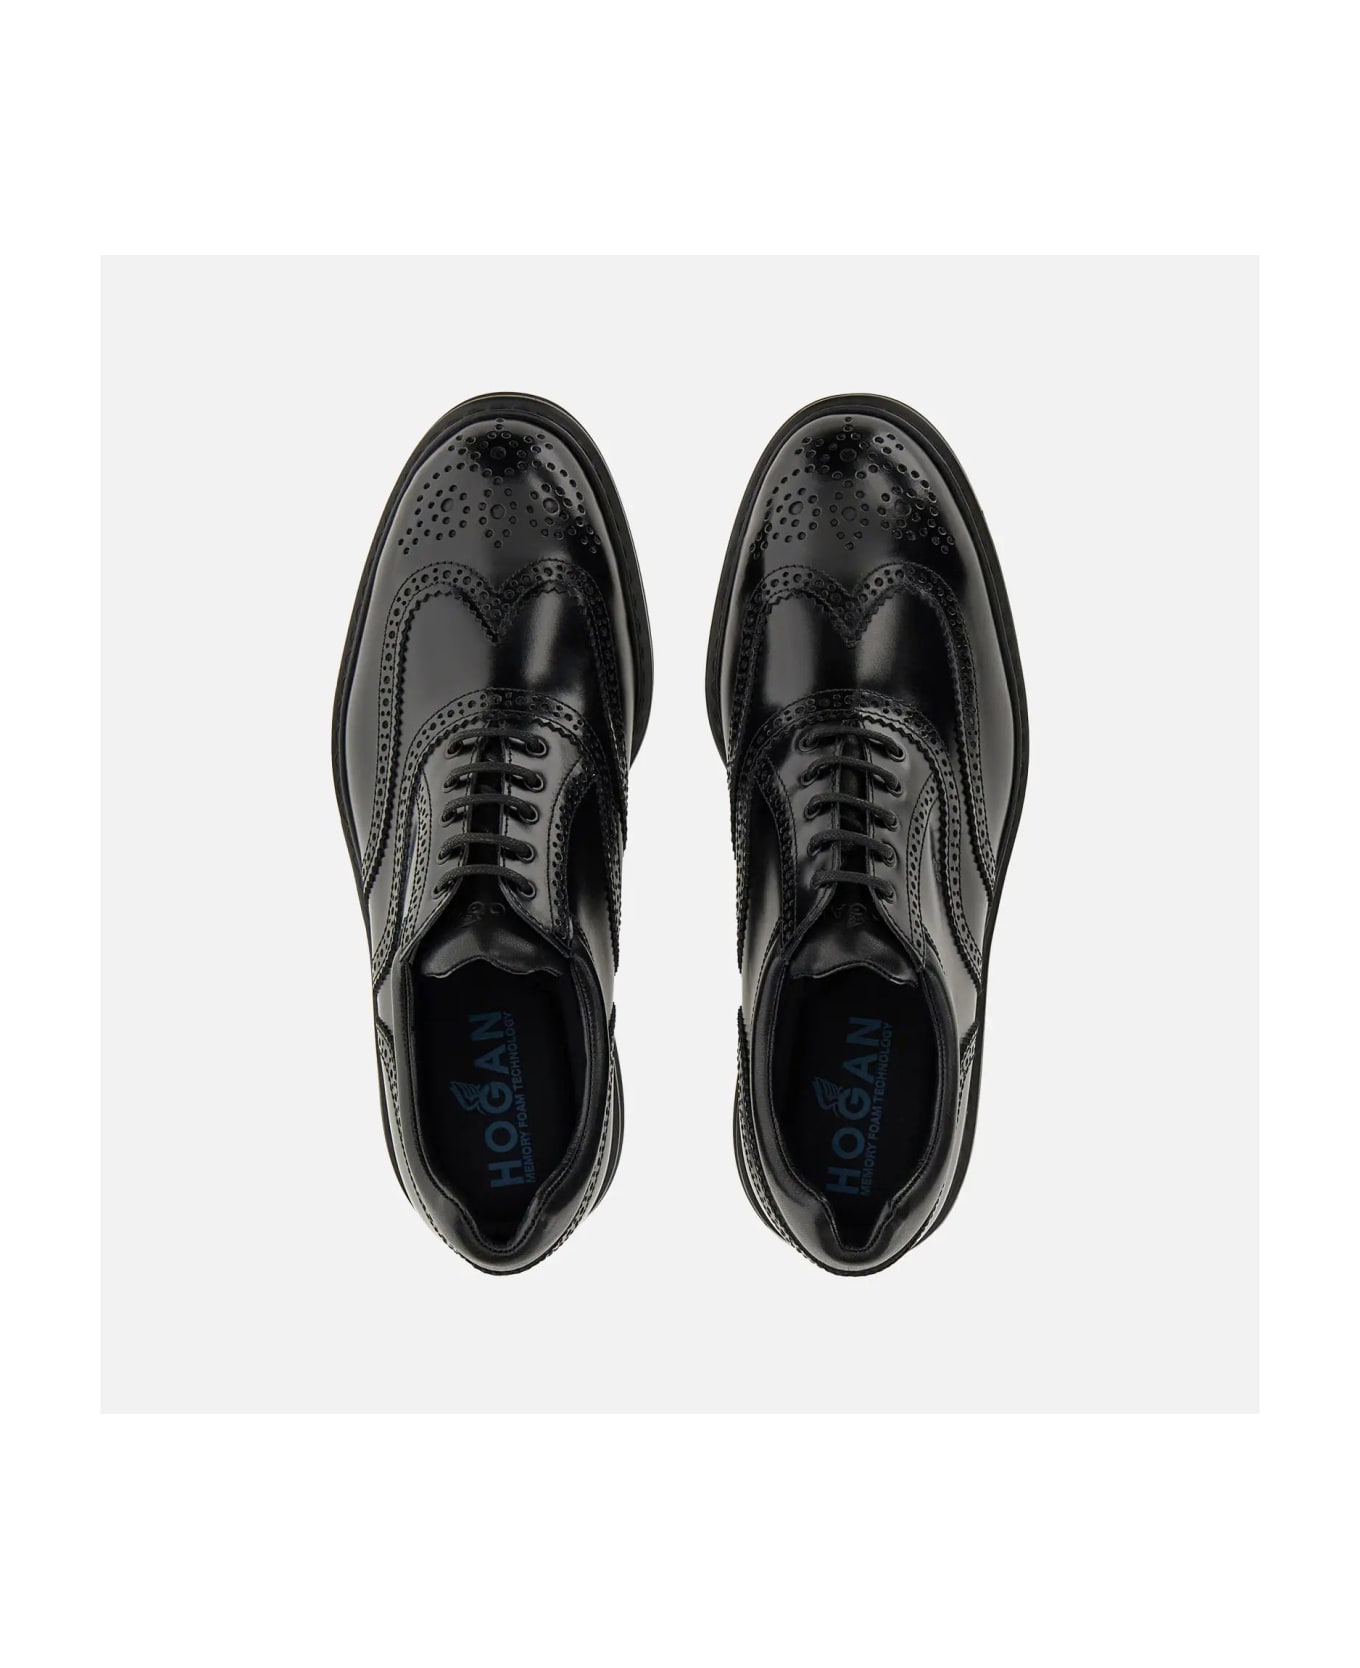 Hogan H576 Leather Lace-up Shoes - black ローファー＆デッキシューズ